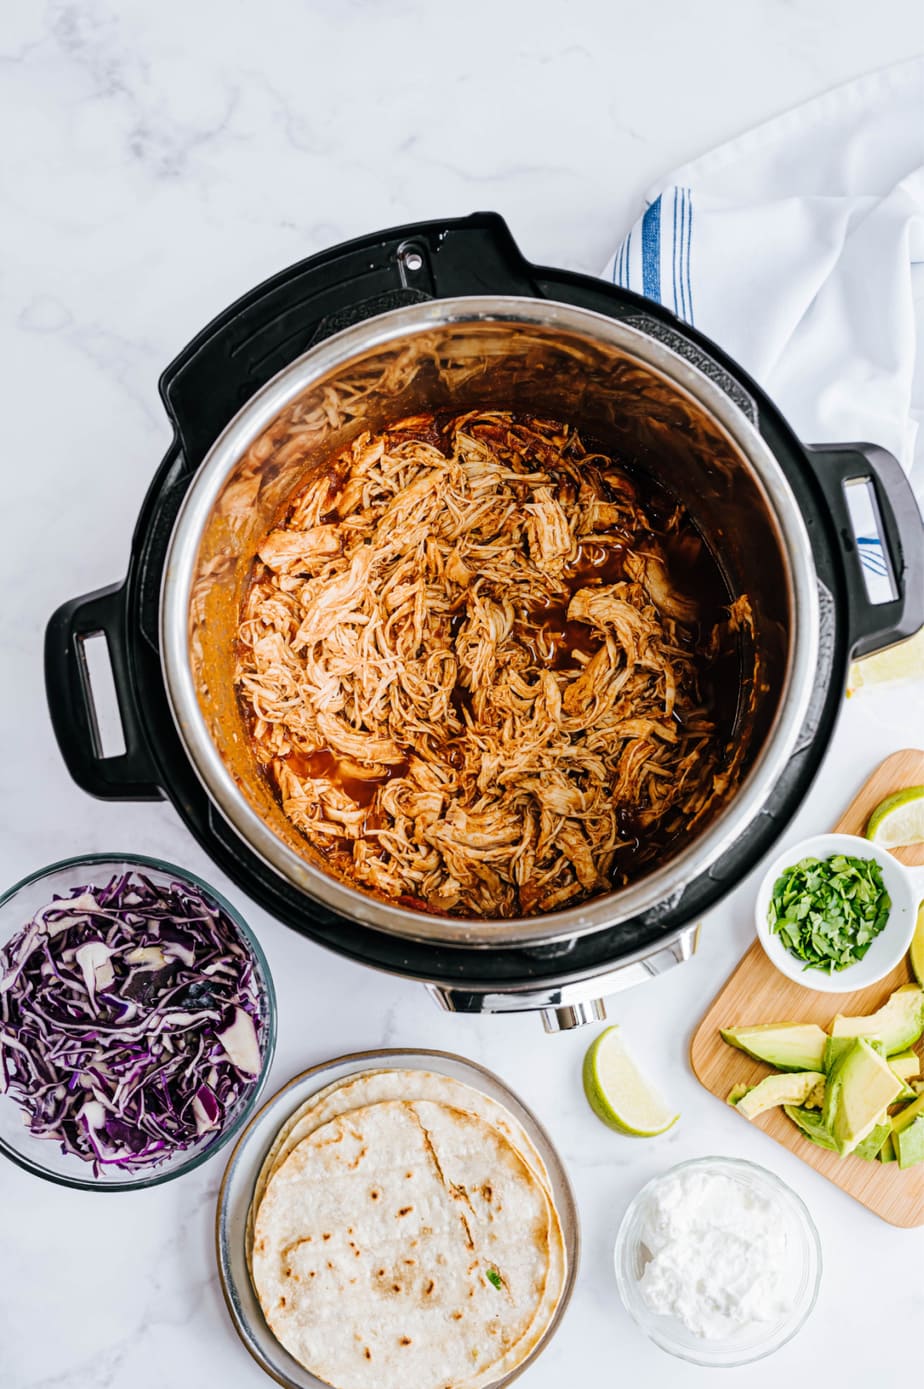 Shredded chicken is in an Instant Pot, ready to be served.